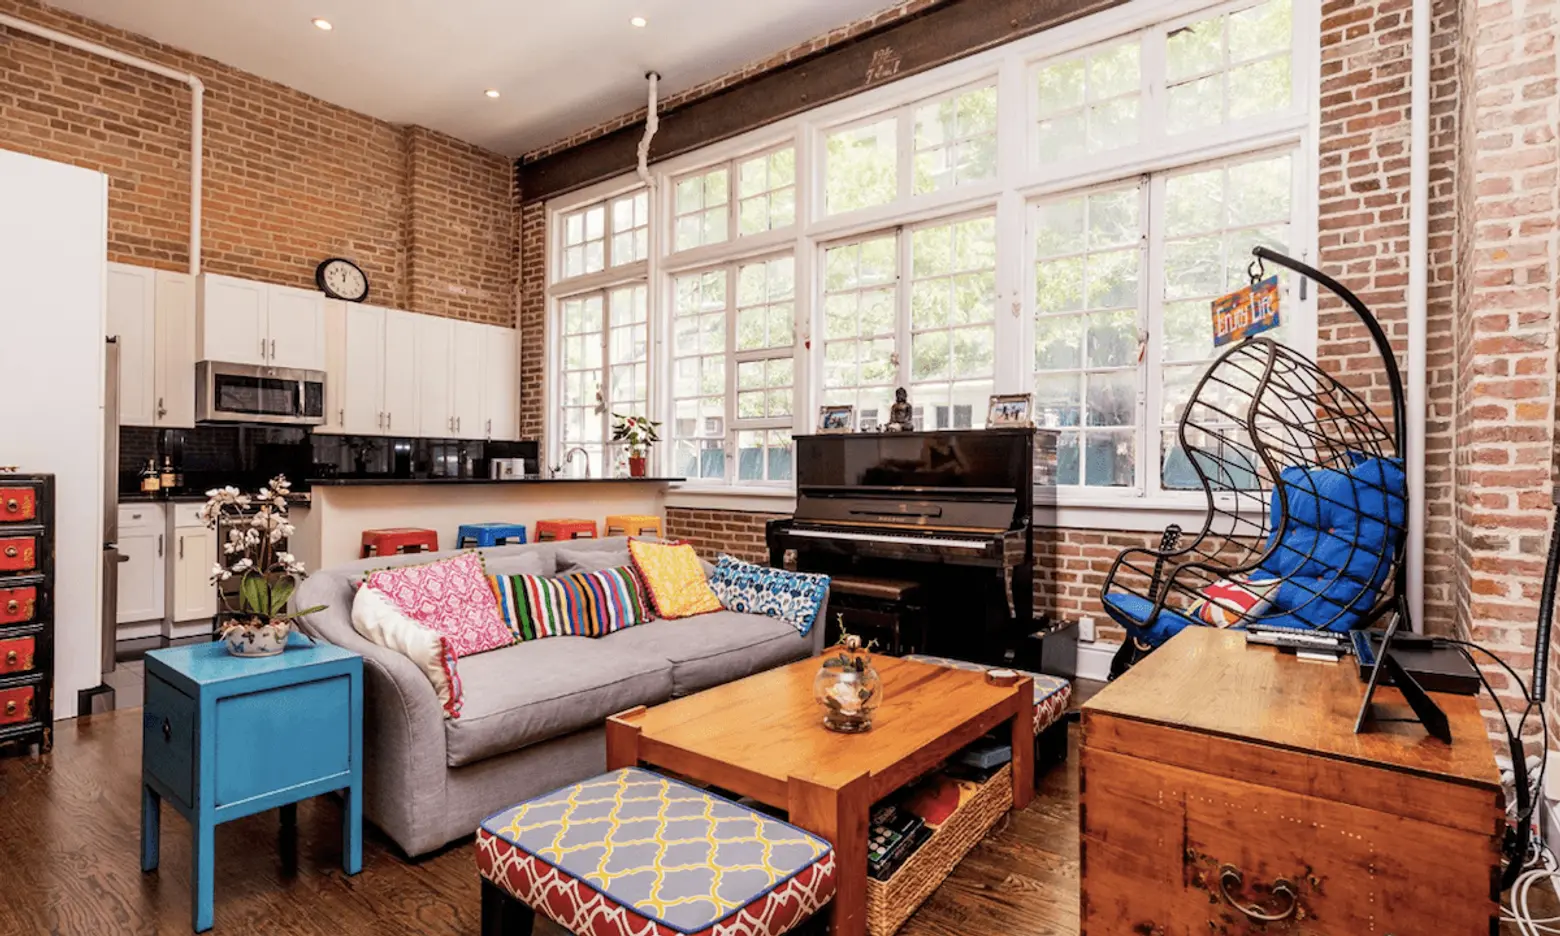 Colorful decor pops against massive brick walls at this $6,950/month Gramercy rental